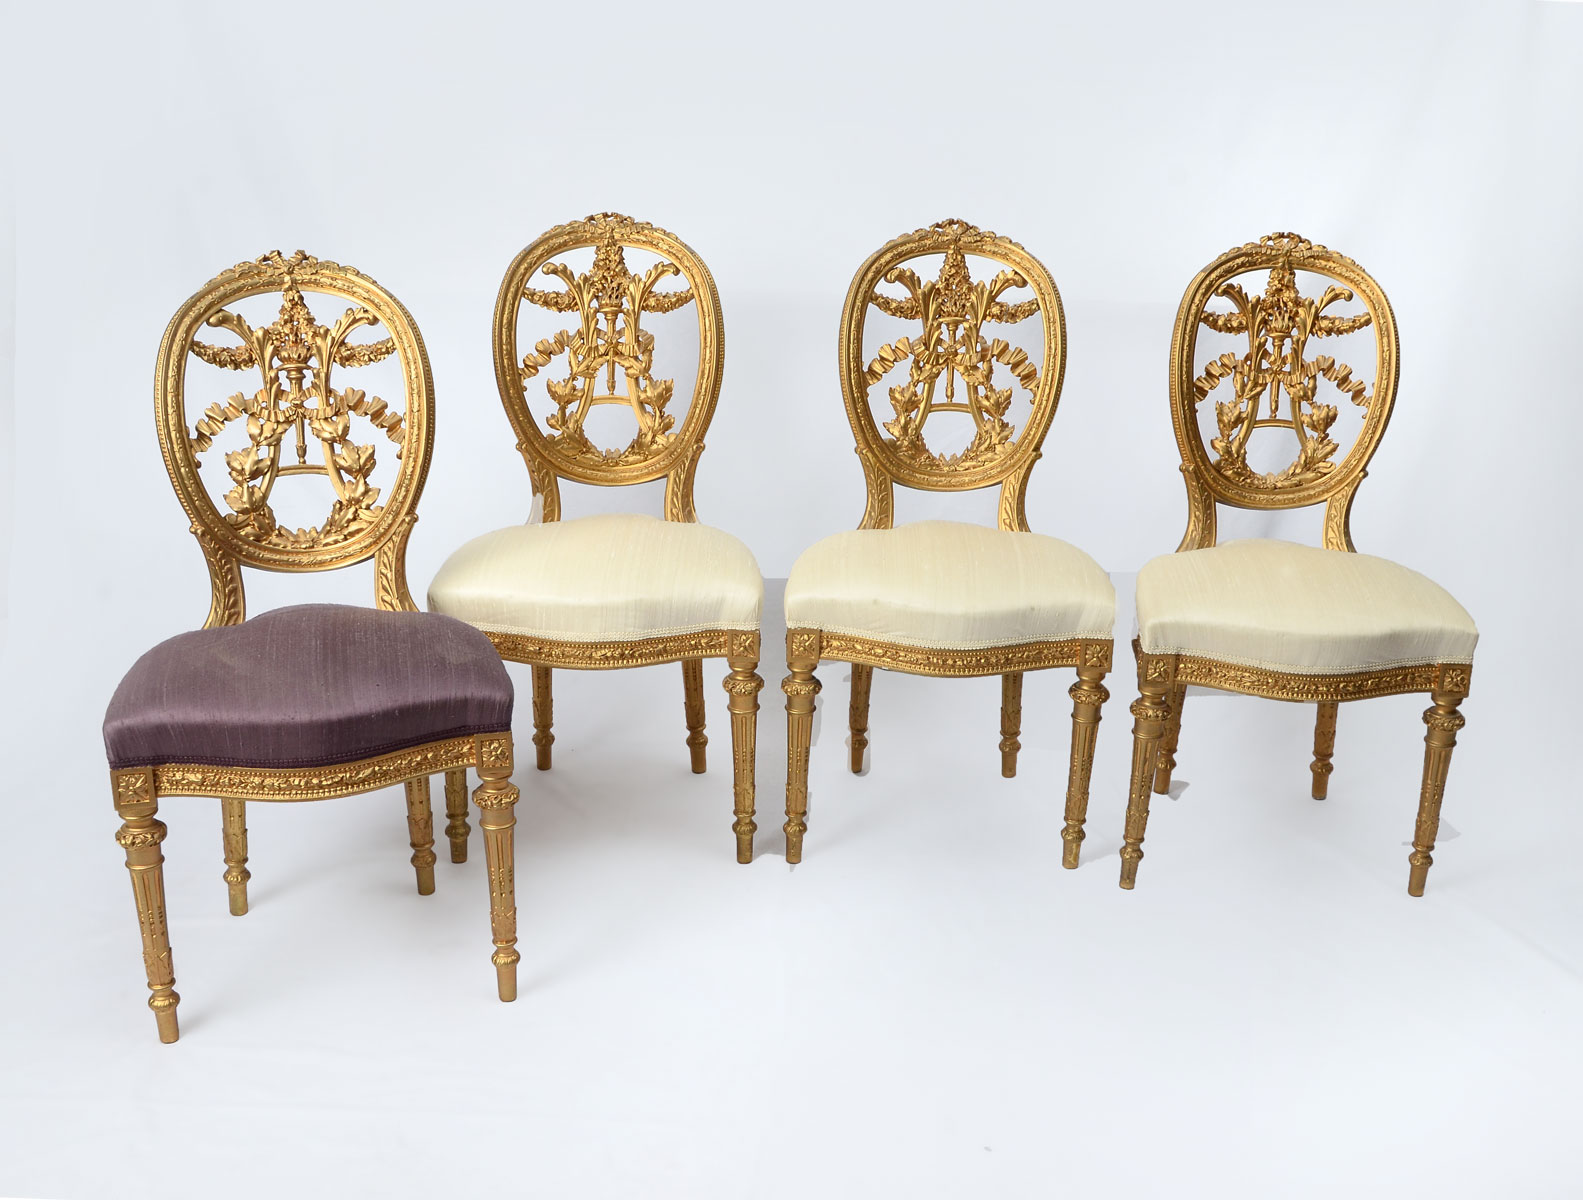 4 CARVED SALON CHAIRS: 4 Parlor